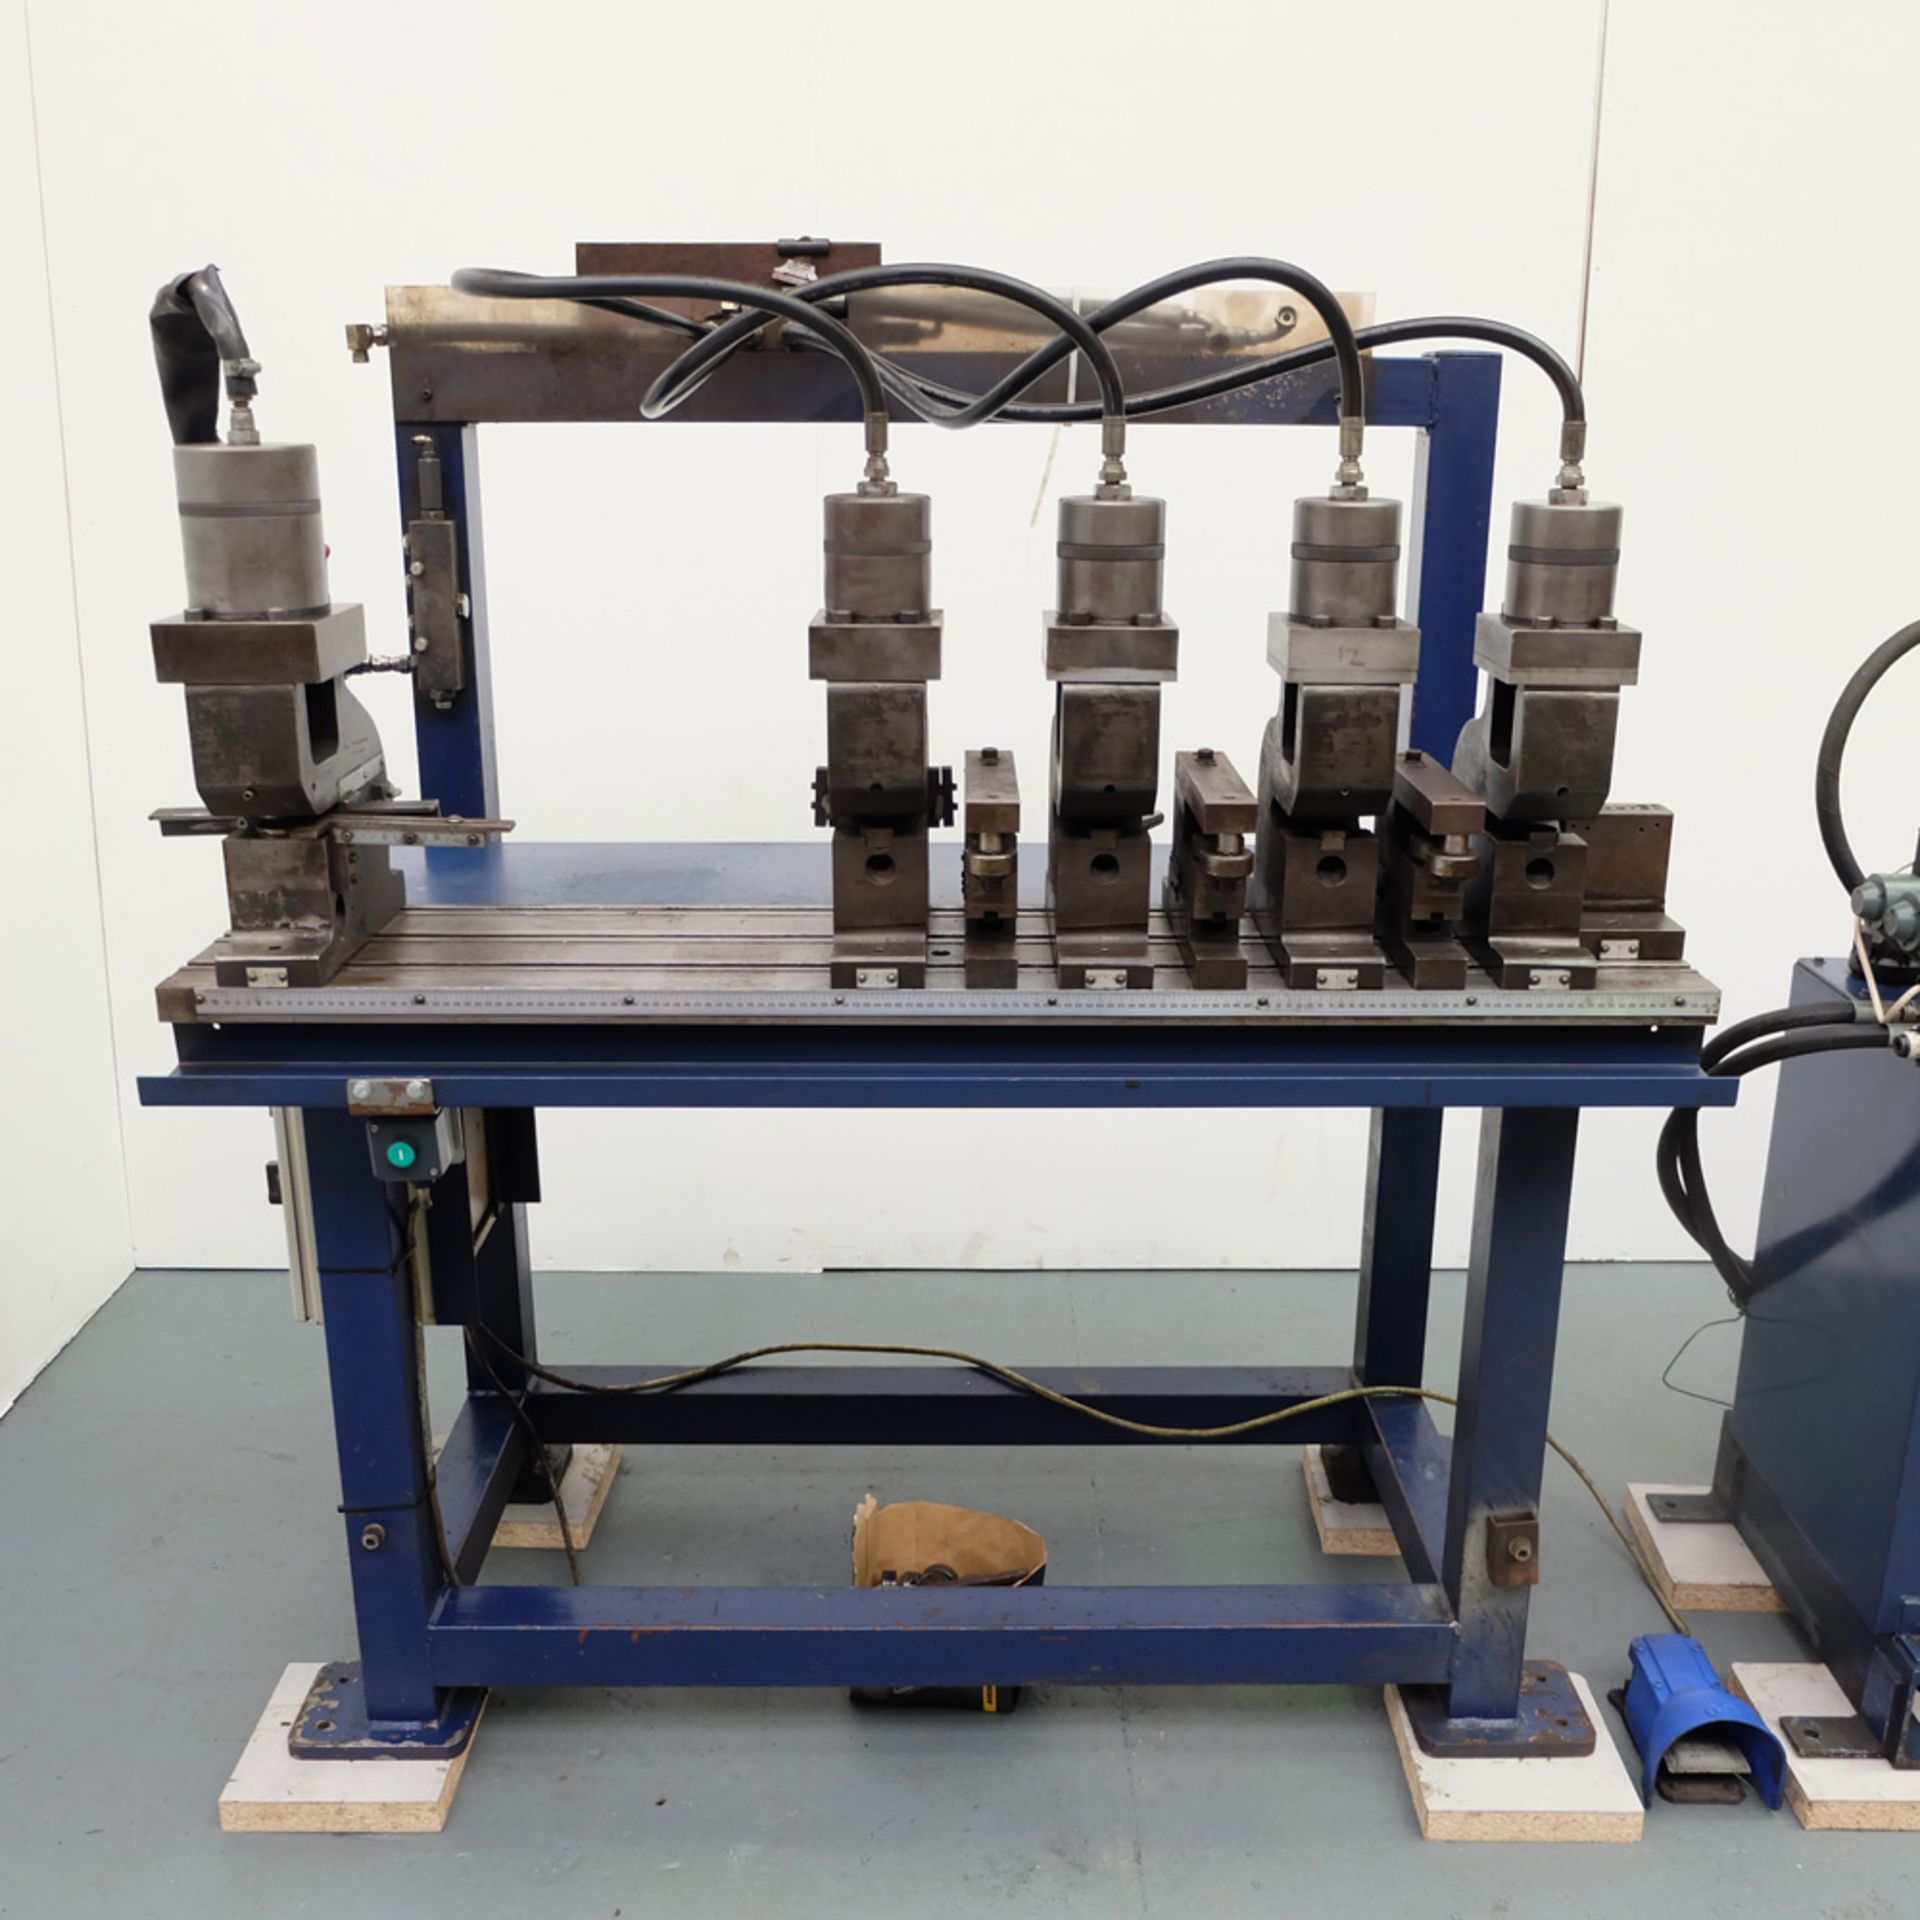 Hydraulic Powered 5 Head Punching Station. On Tee Slotted Table.